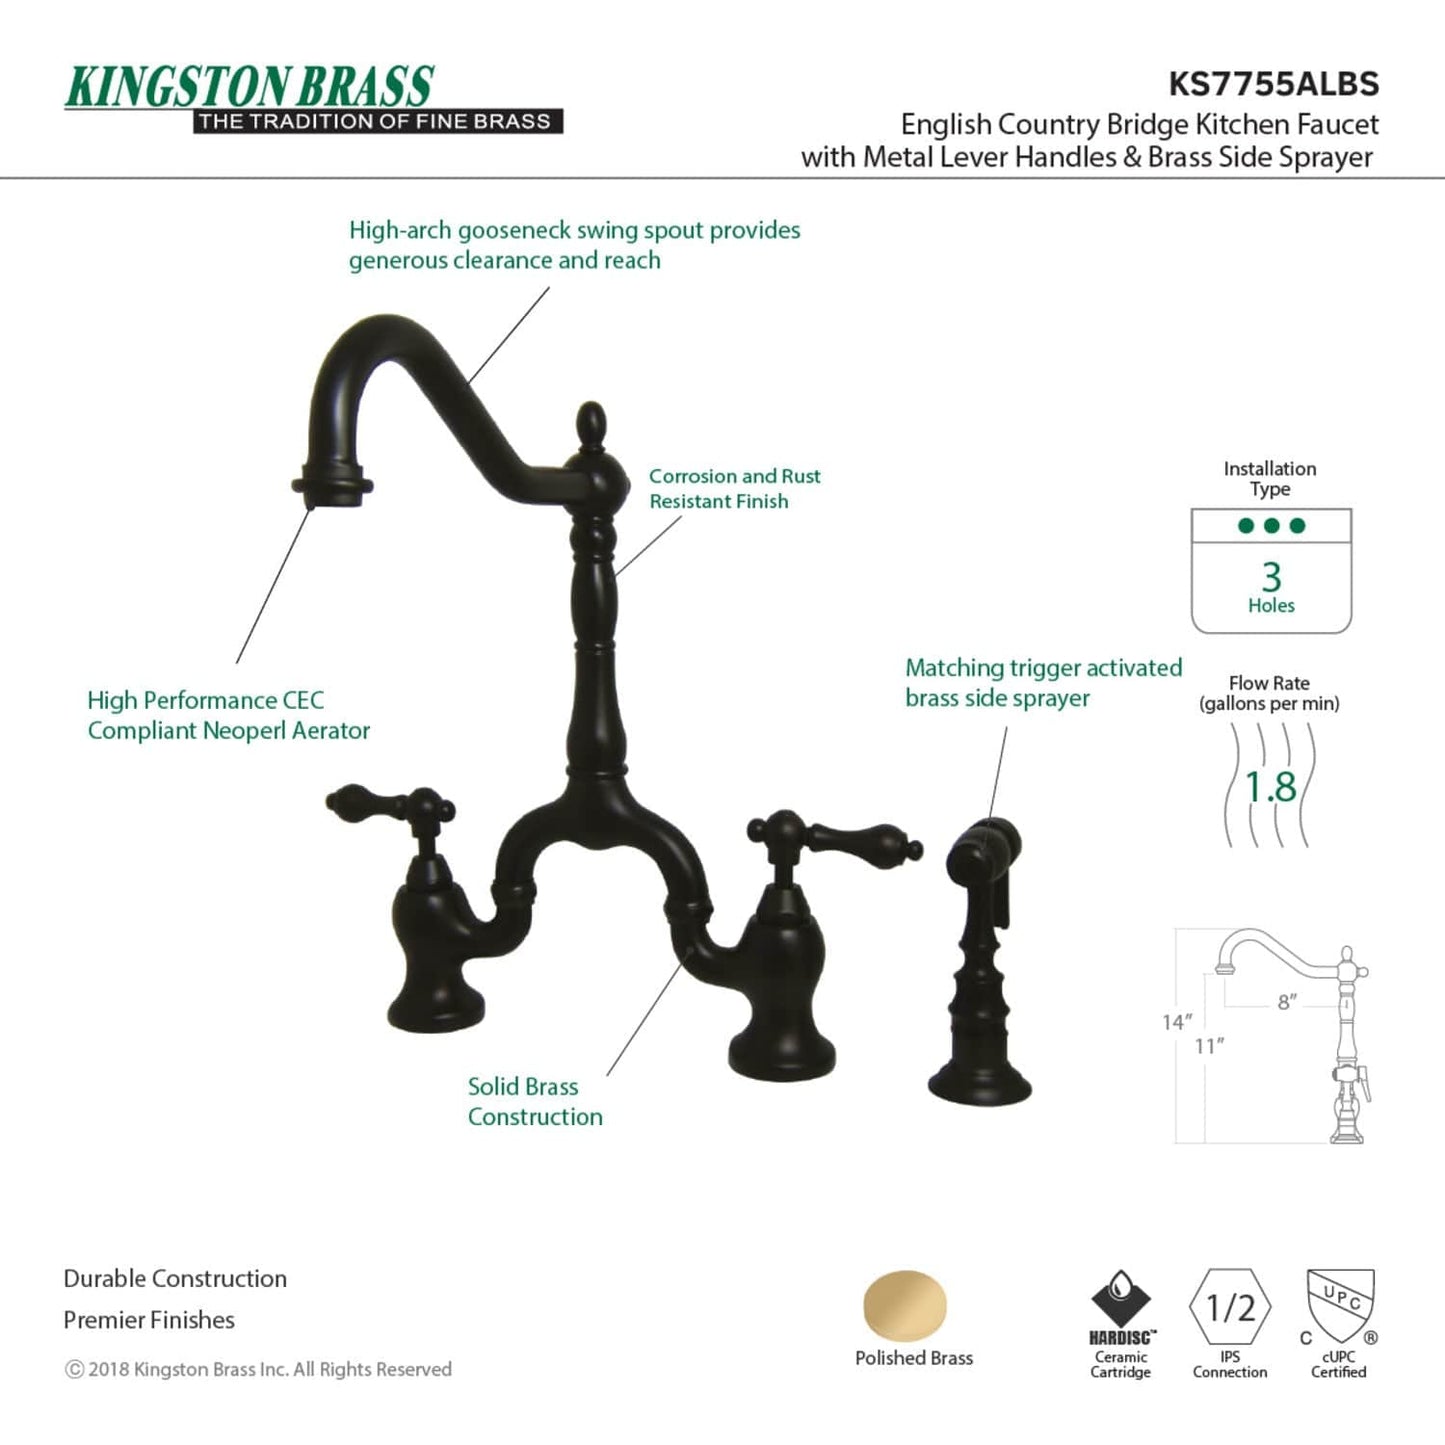 KINGSTON Brass English Country Kitchen Bridge Faucet with Brass Sprayer - Oil Rubbed Bronze